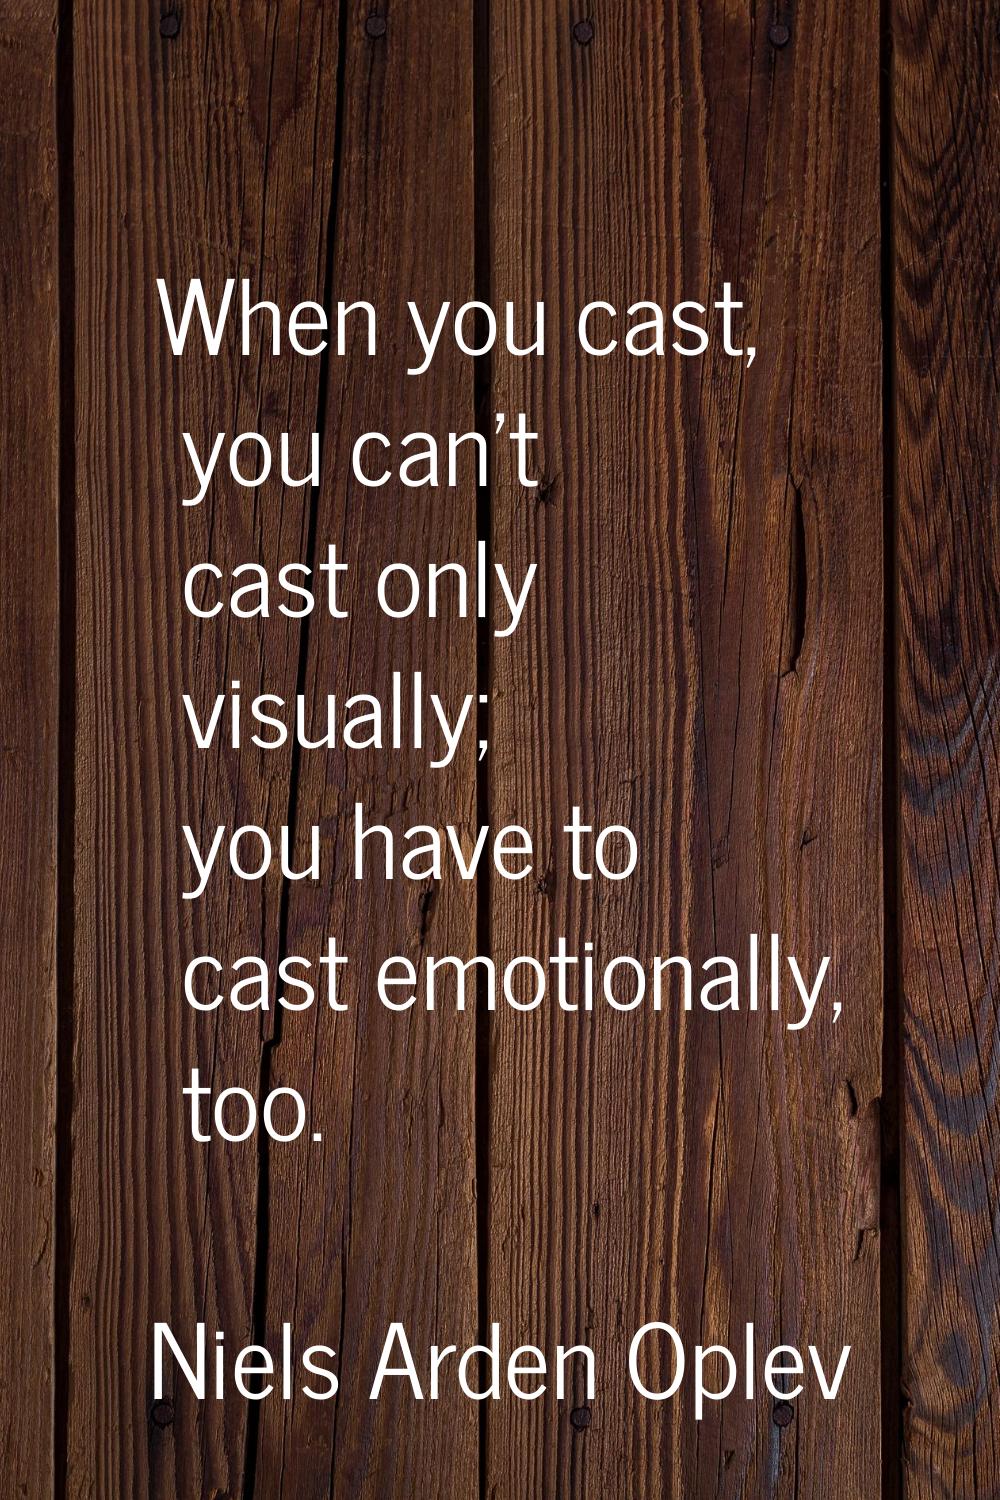 When you cast, you can't cast only visually; you have to cast emotionally, too.